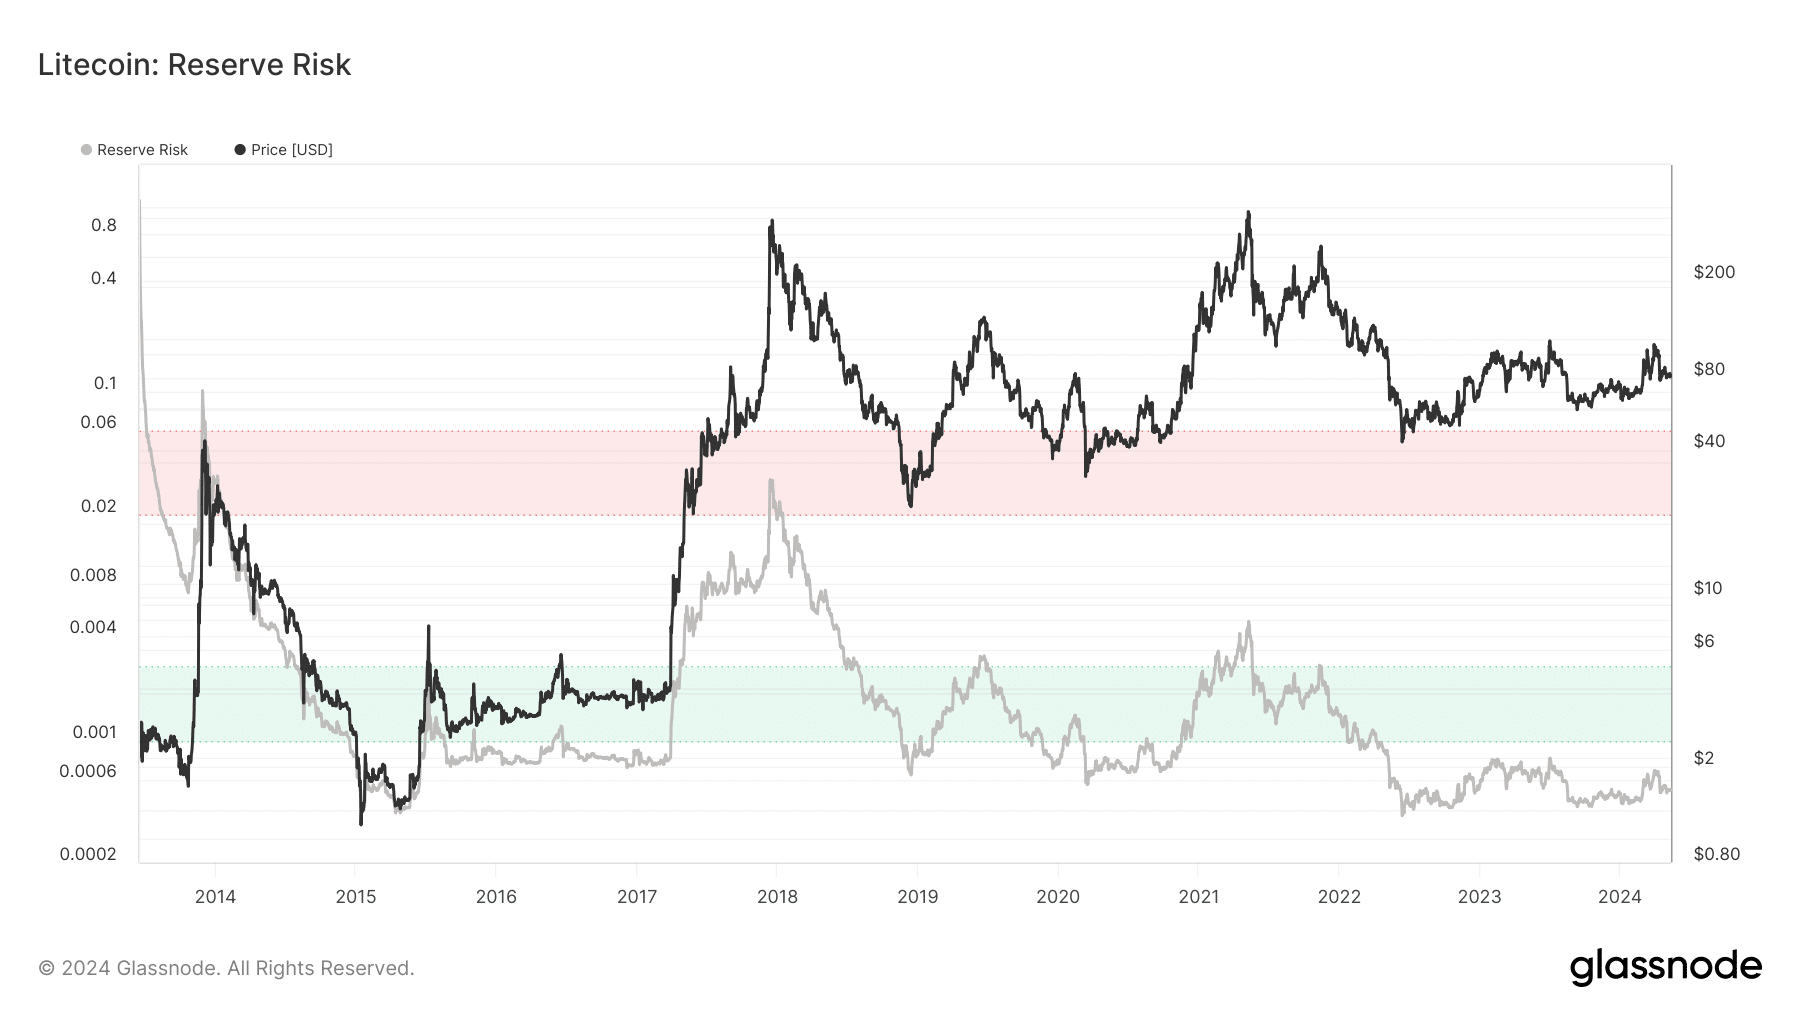 LTC's reserve risk was near its all-time low